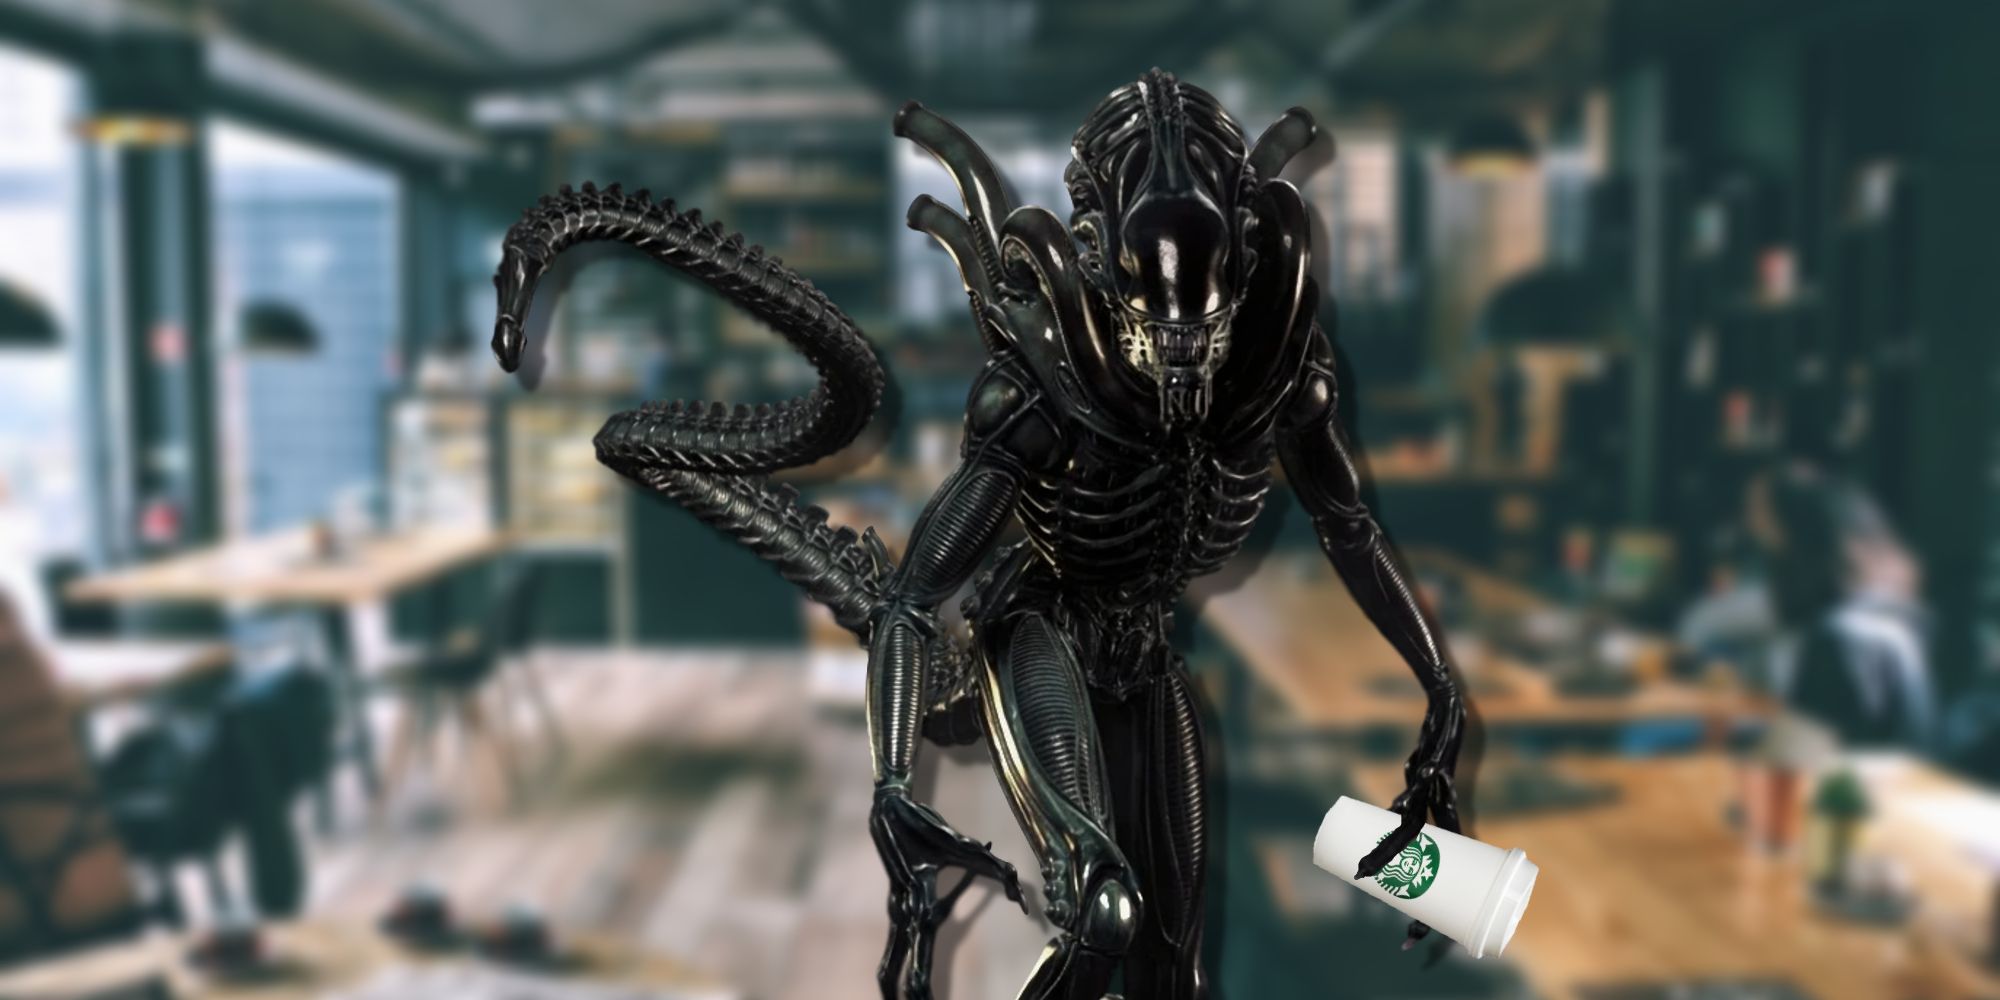 Fall Activities To Do With Horror Game Monsters Alien Xenomorph Getting A Pumpkin Spice Latte